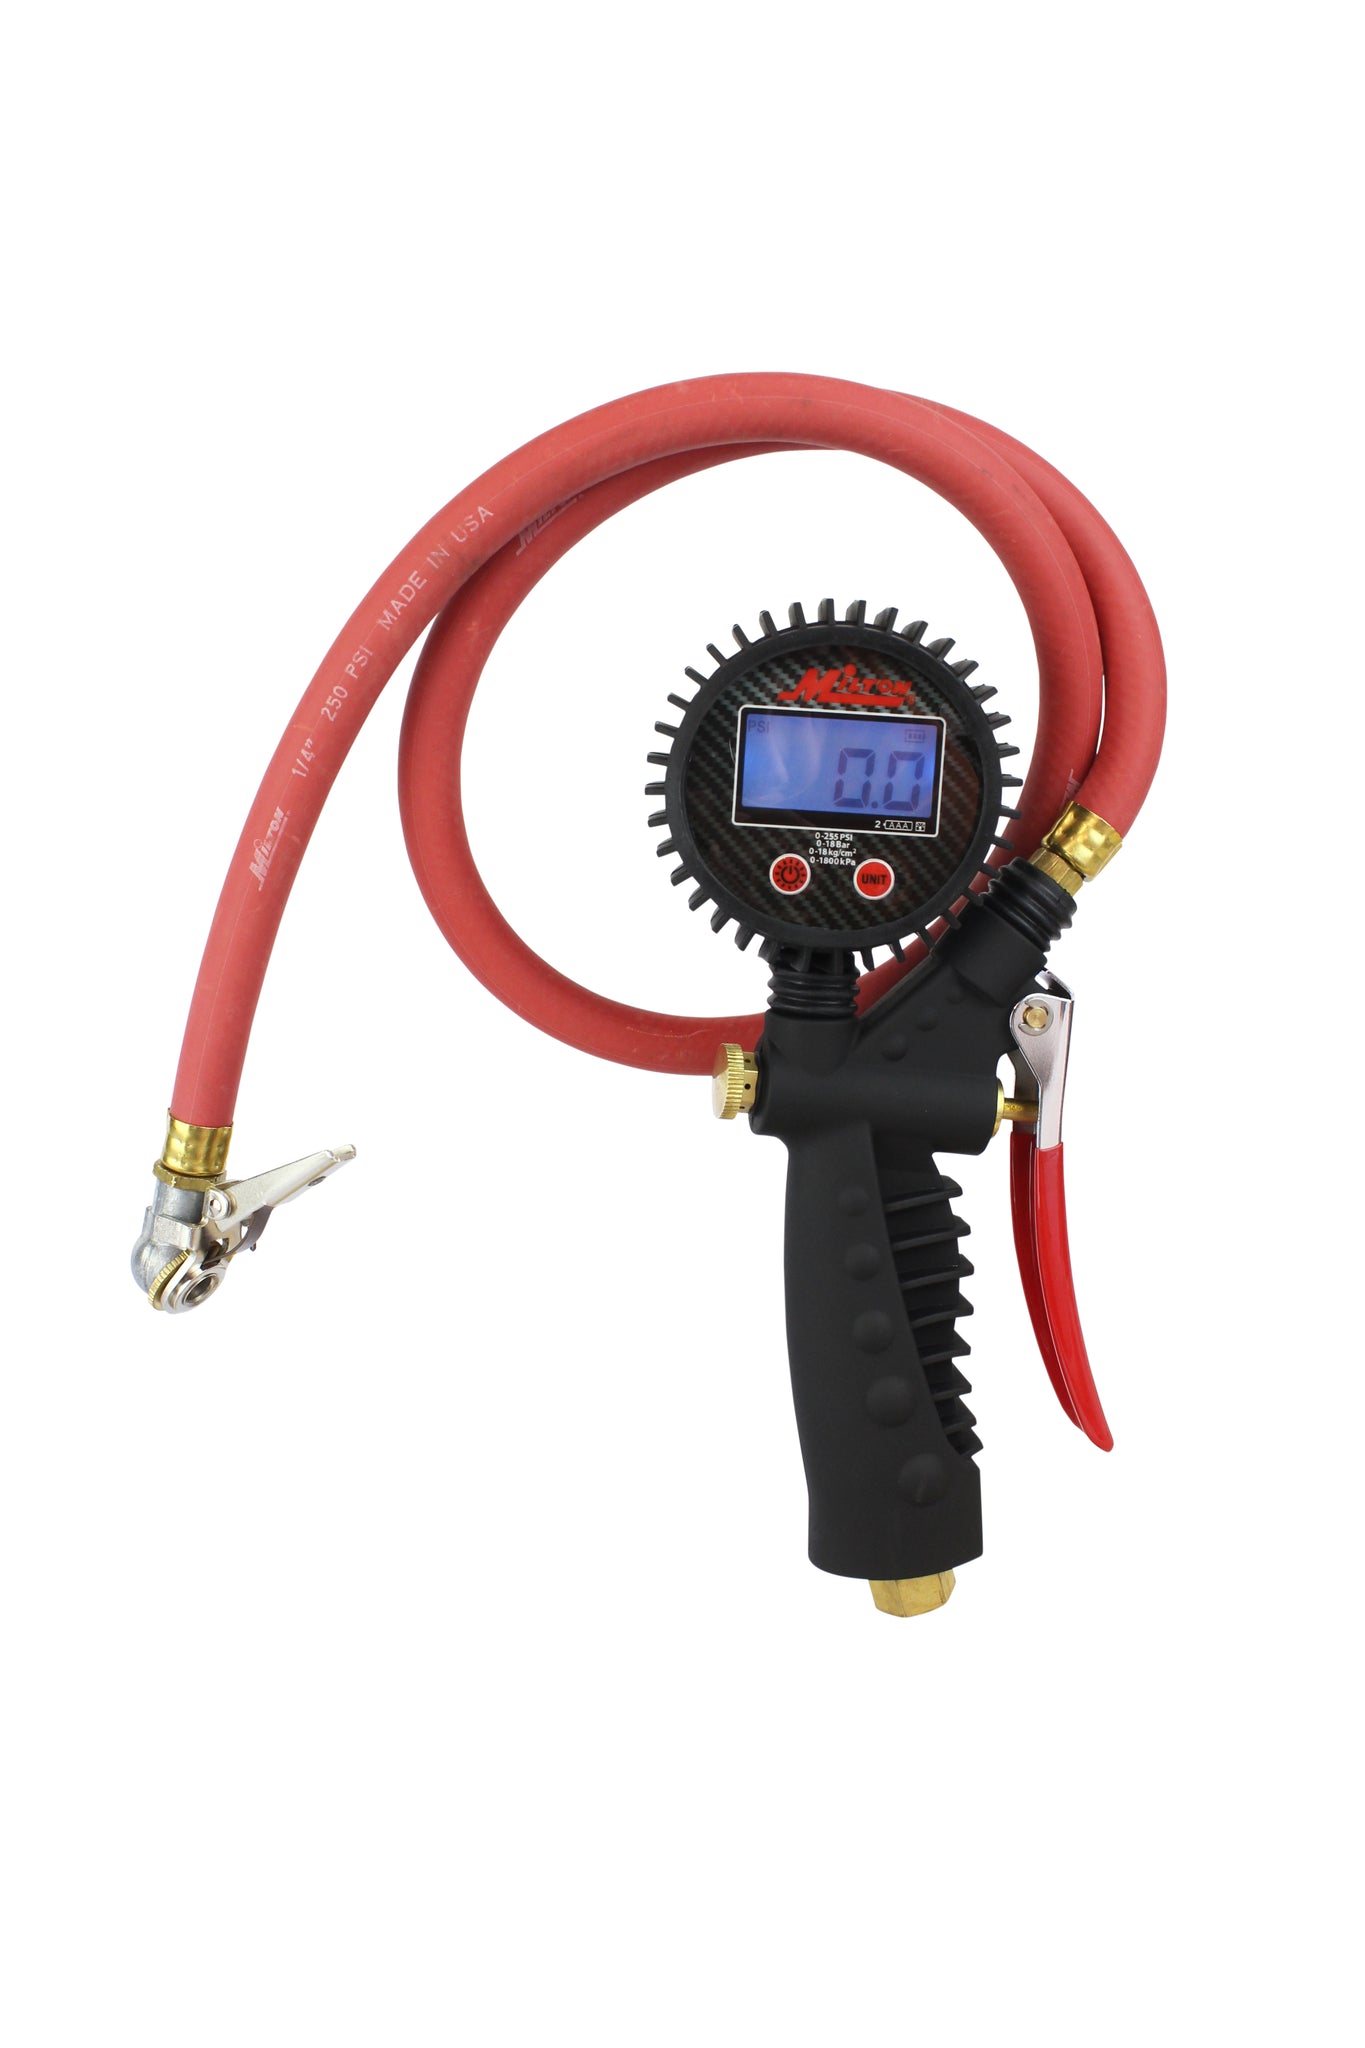 Milton 572D Pro Digital Pistol Grip Tire Inflator with Pressure Gauge 36" Hose and Kwik Grip Safety Chuck, Made In USA 255 PSI - 1